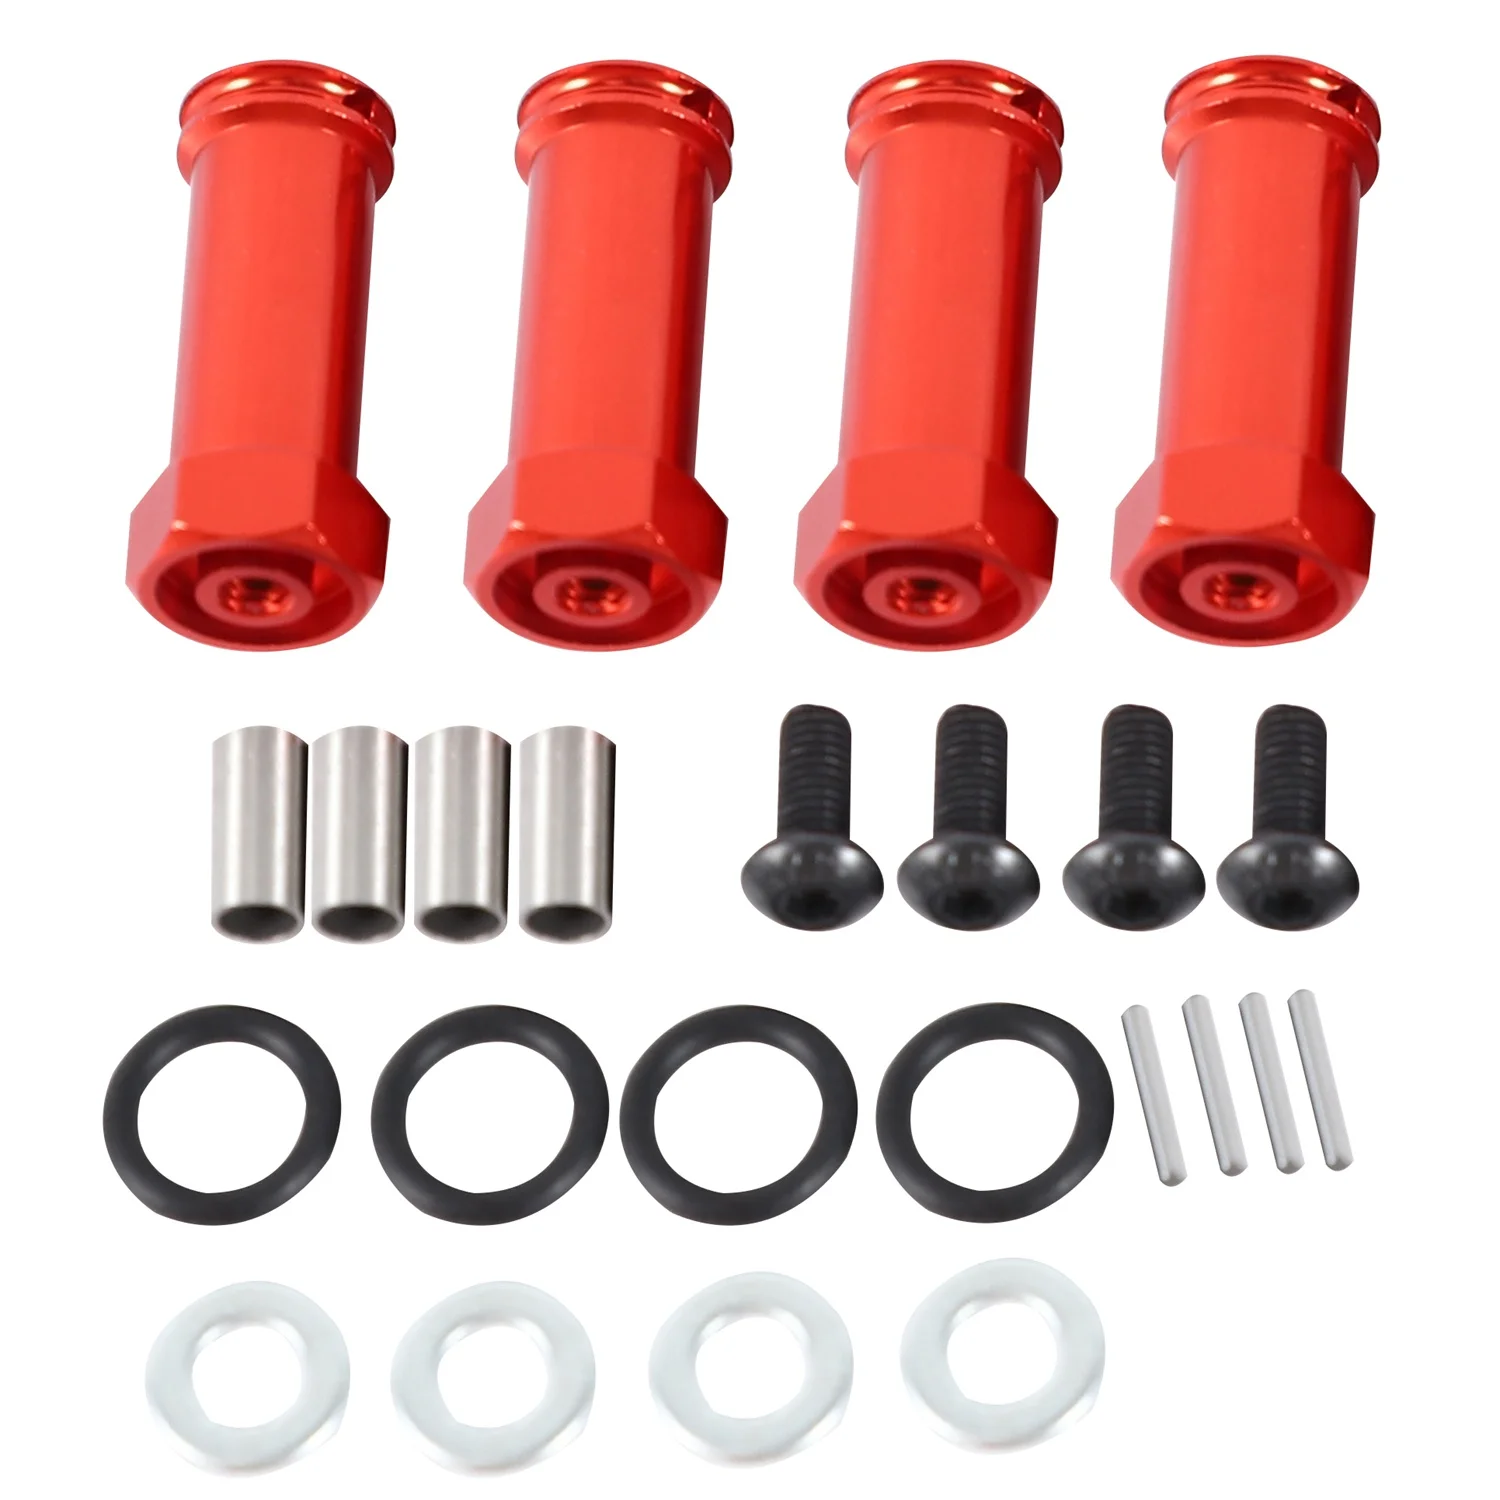 

12Mm Aluminum Wheel Hex Adapters Long 29Mm Extension RC Car Conversion Parts for 1/12 Wltoys 12428 12423 Red